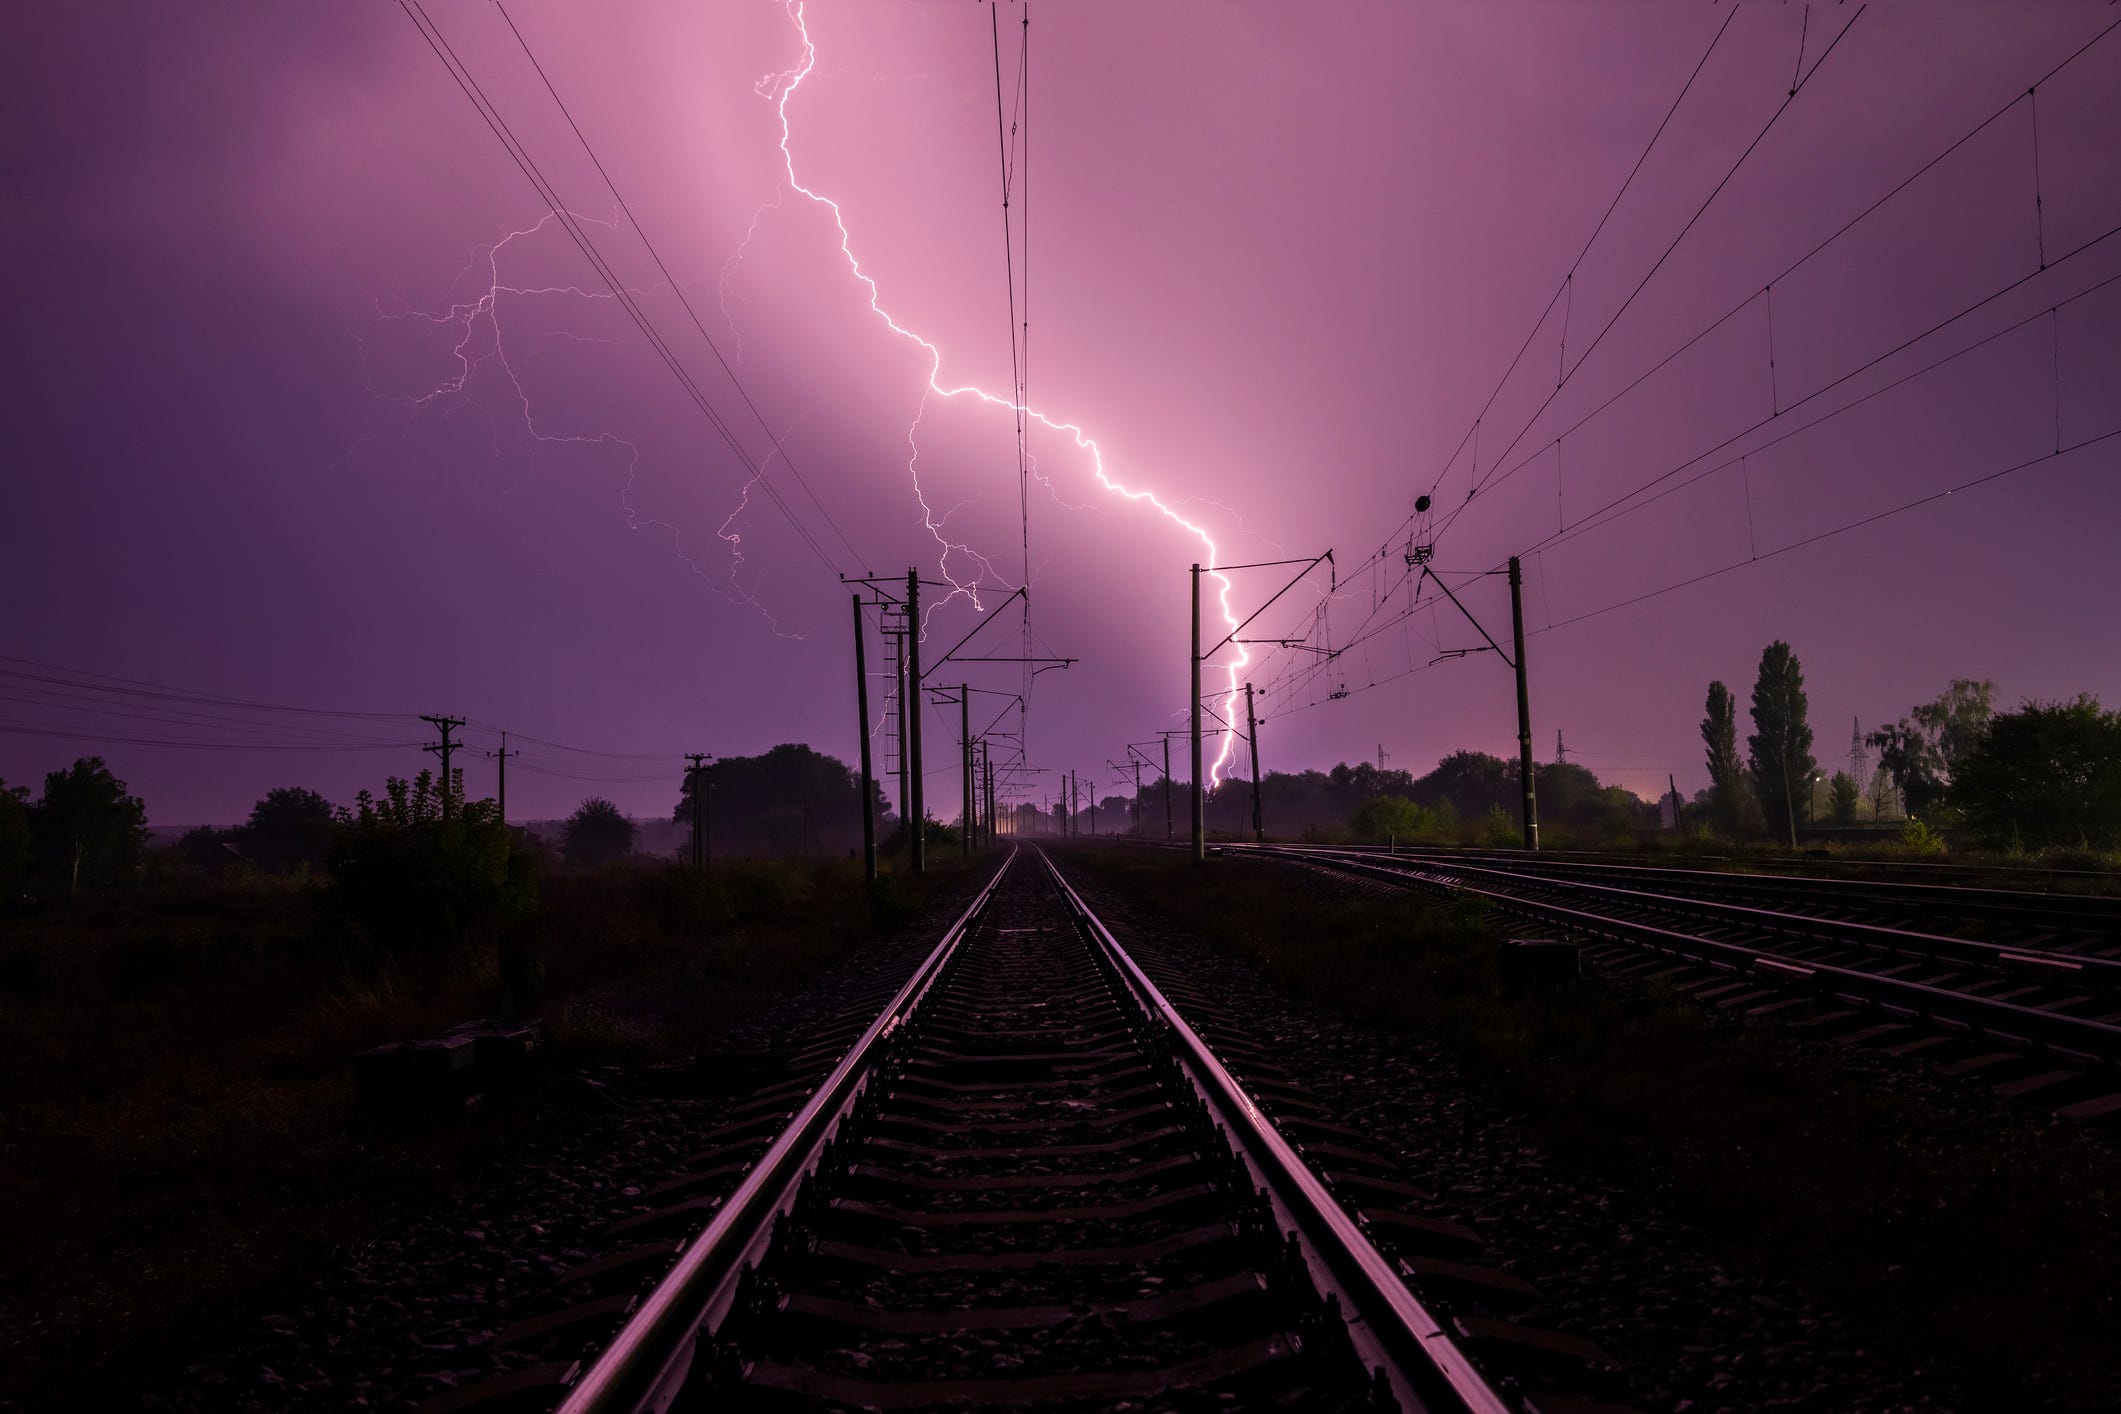 Brutal Storms From Space Could Absolutely Devastate Our Trains and Railroads